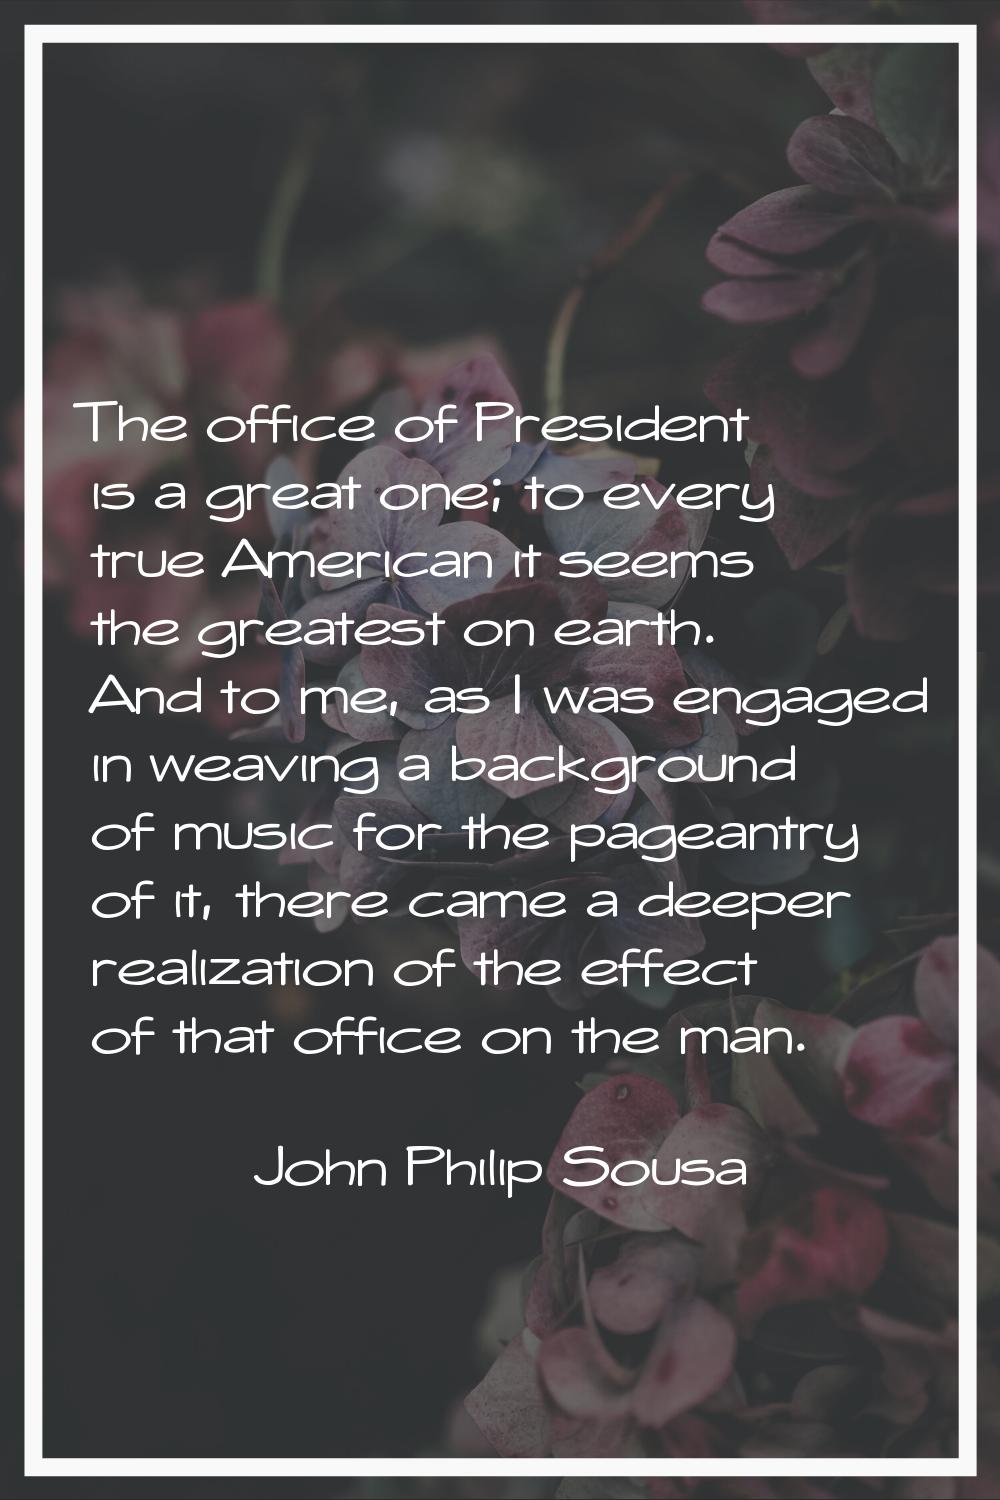 The office of President is a great one; to every true American it seems the greatest on earth. And 